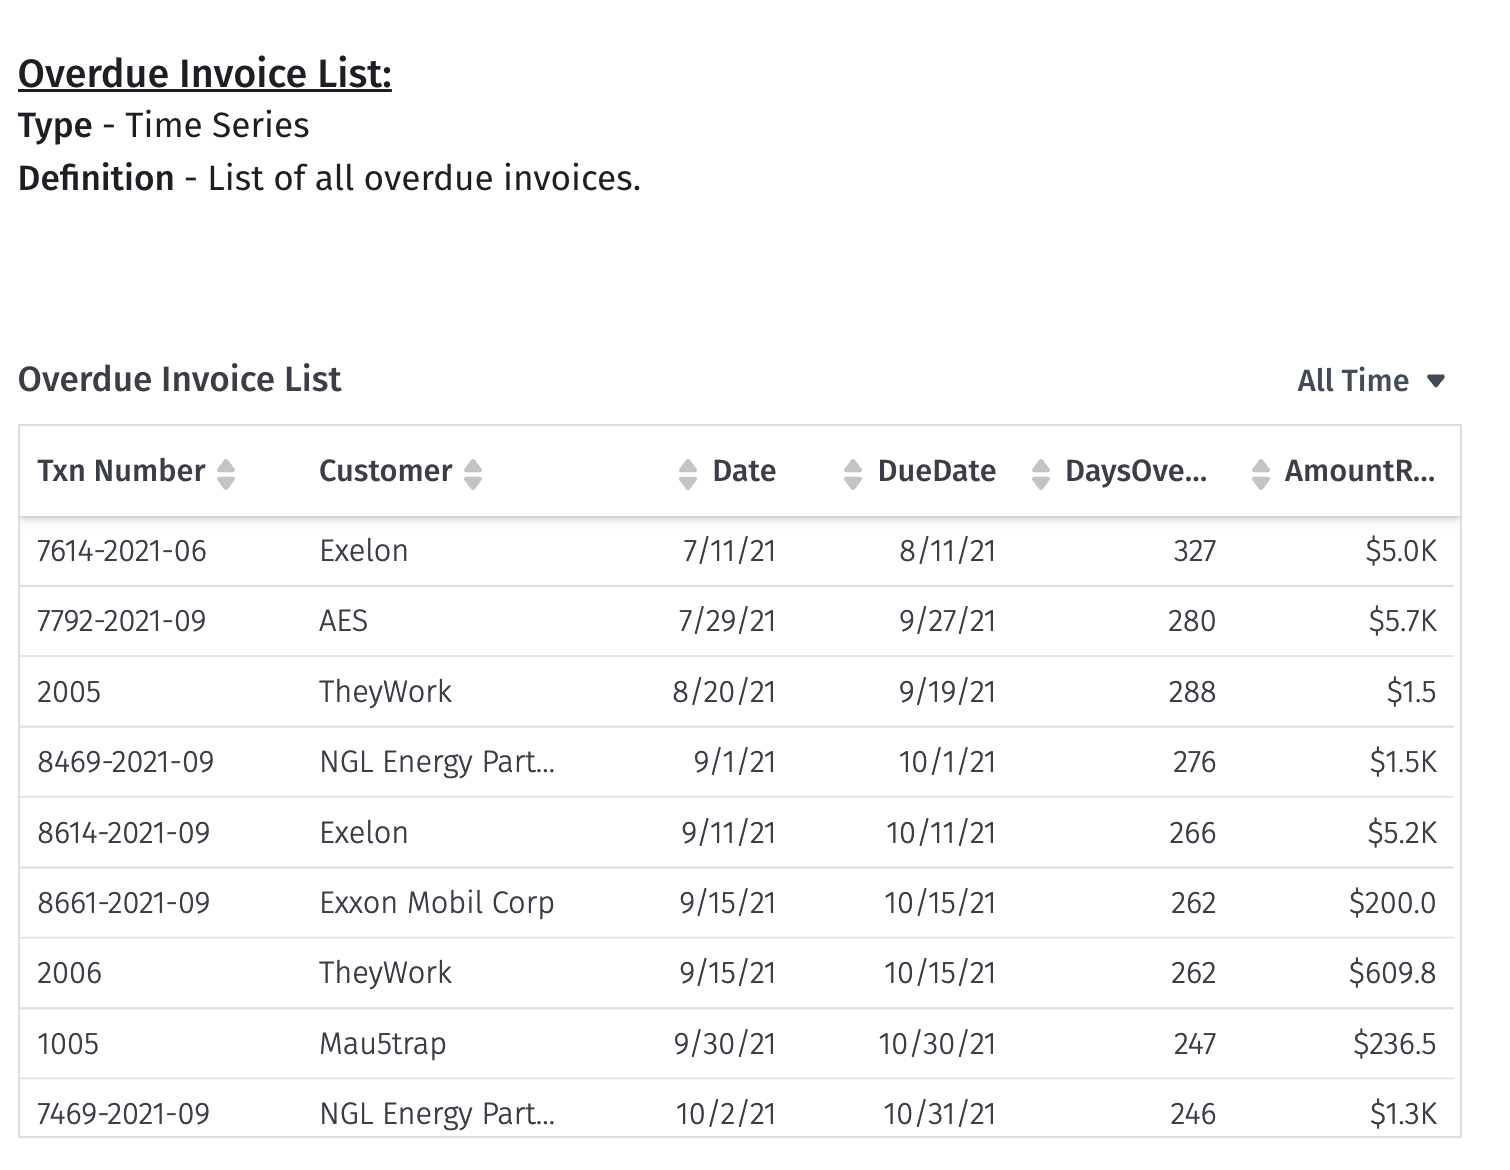 overdue invoice list table view in Mosaic